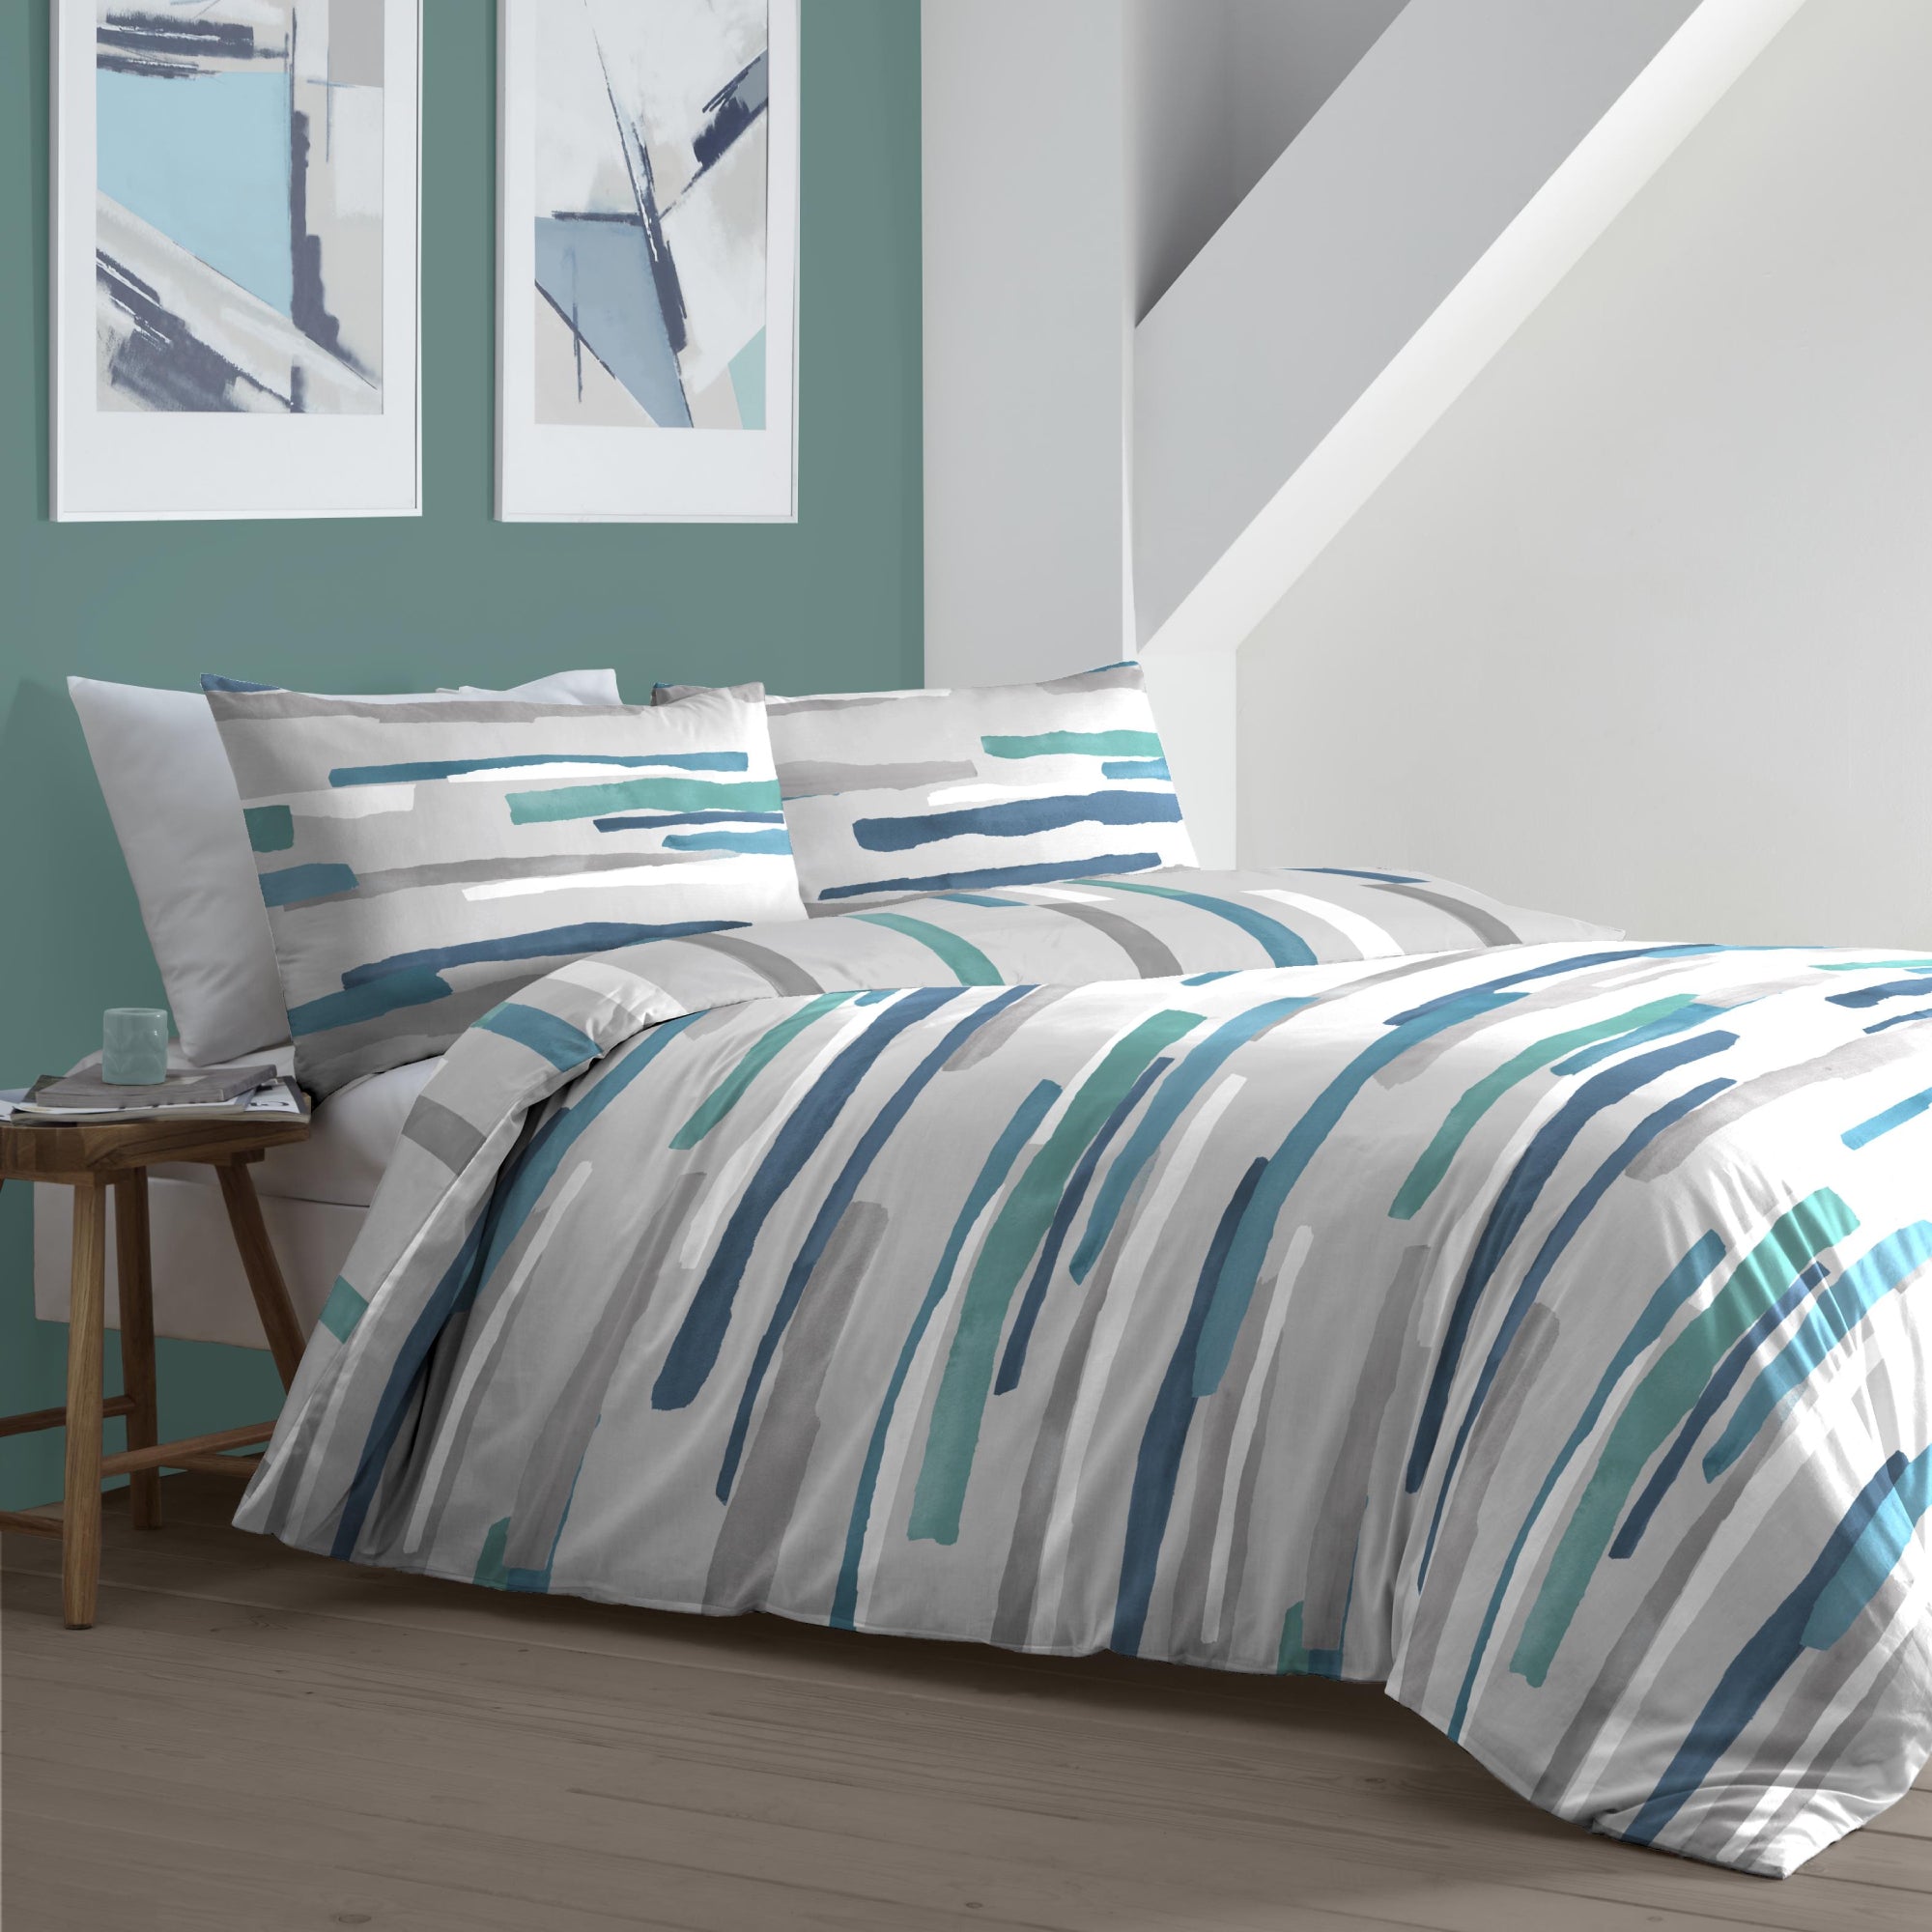 Duvet Cover Set Clifton by Fusion in Teal